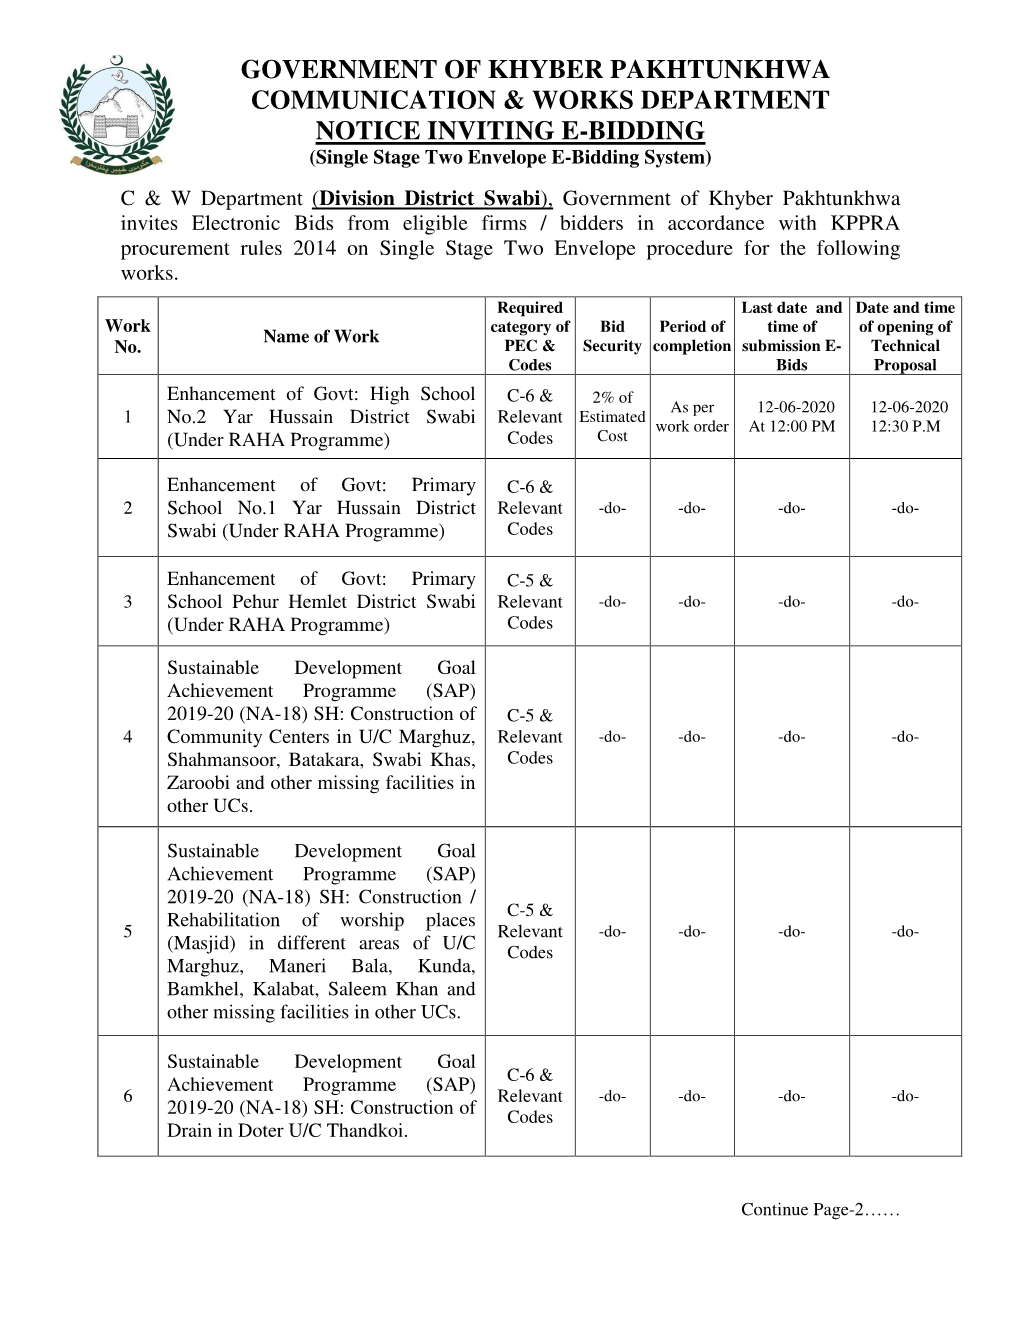 Government of Khyber Pakhtunkhwa Communication & Works Department Notice Inviting E-Bidding